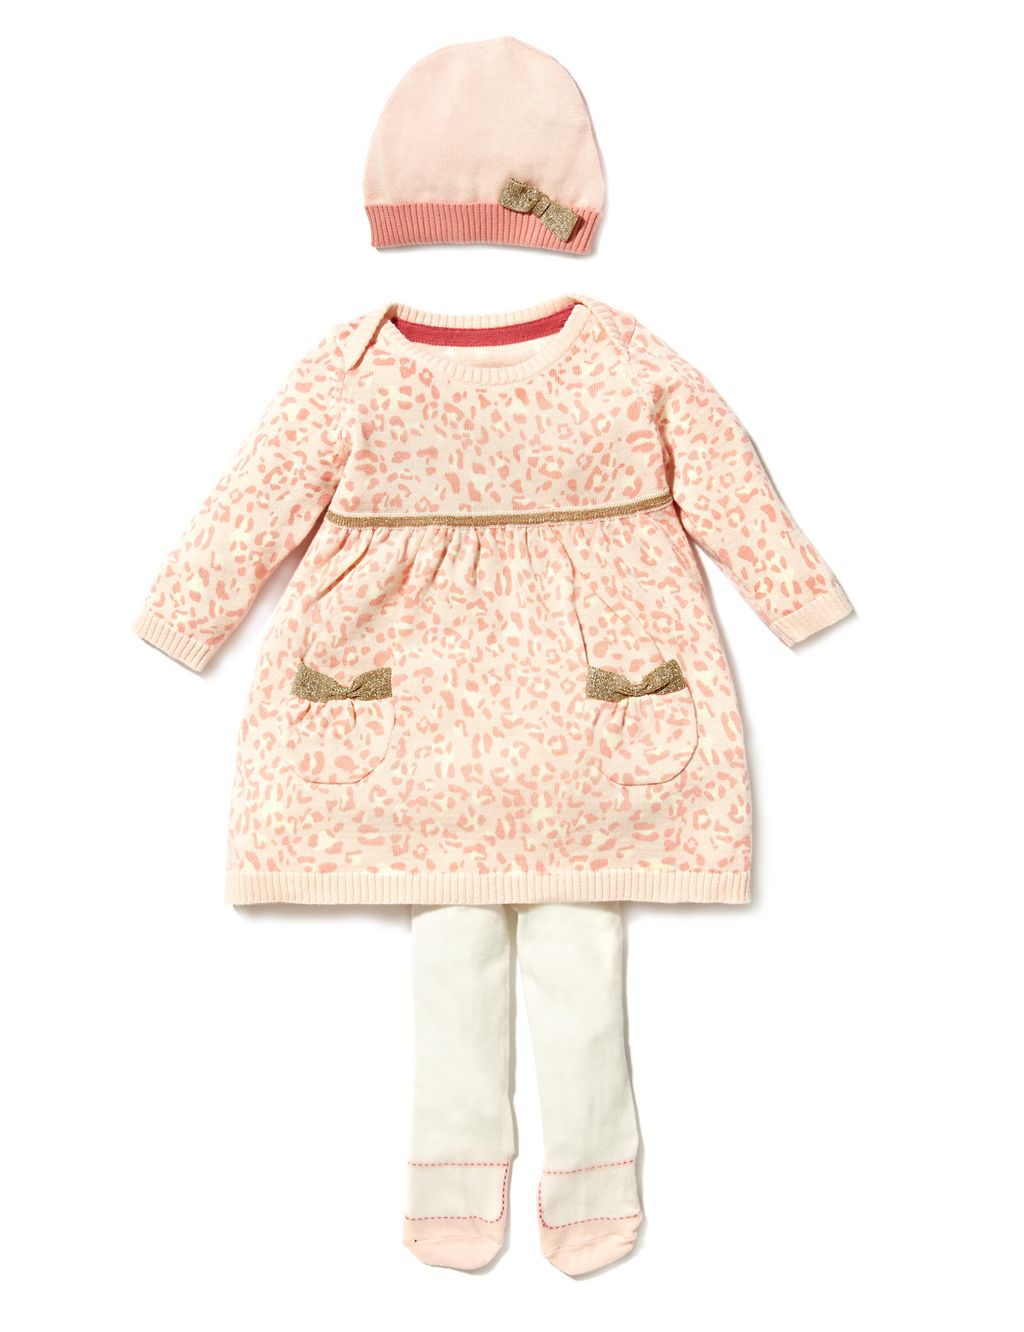 Cotton Rich Animal Knitted Dress, Hat & Tights Outfit 1 of 2